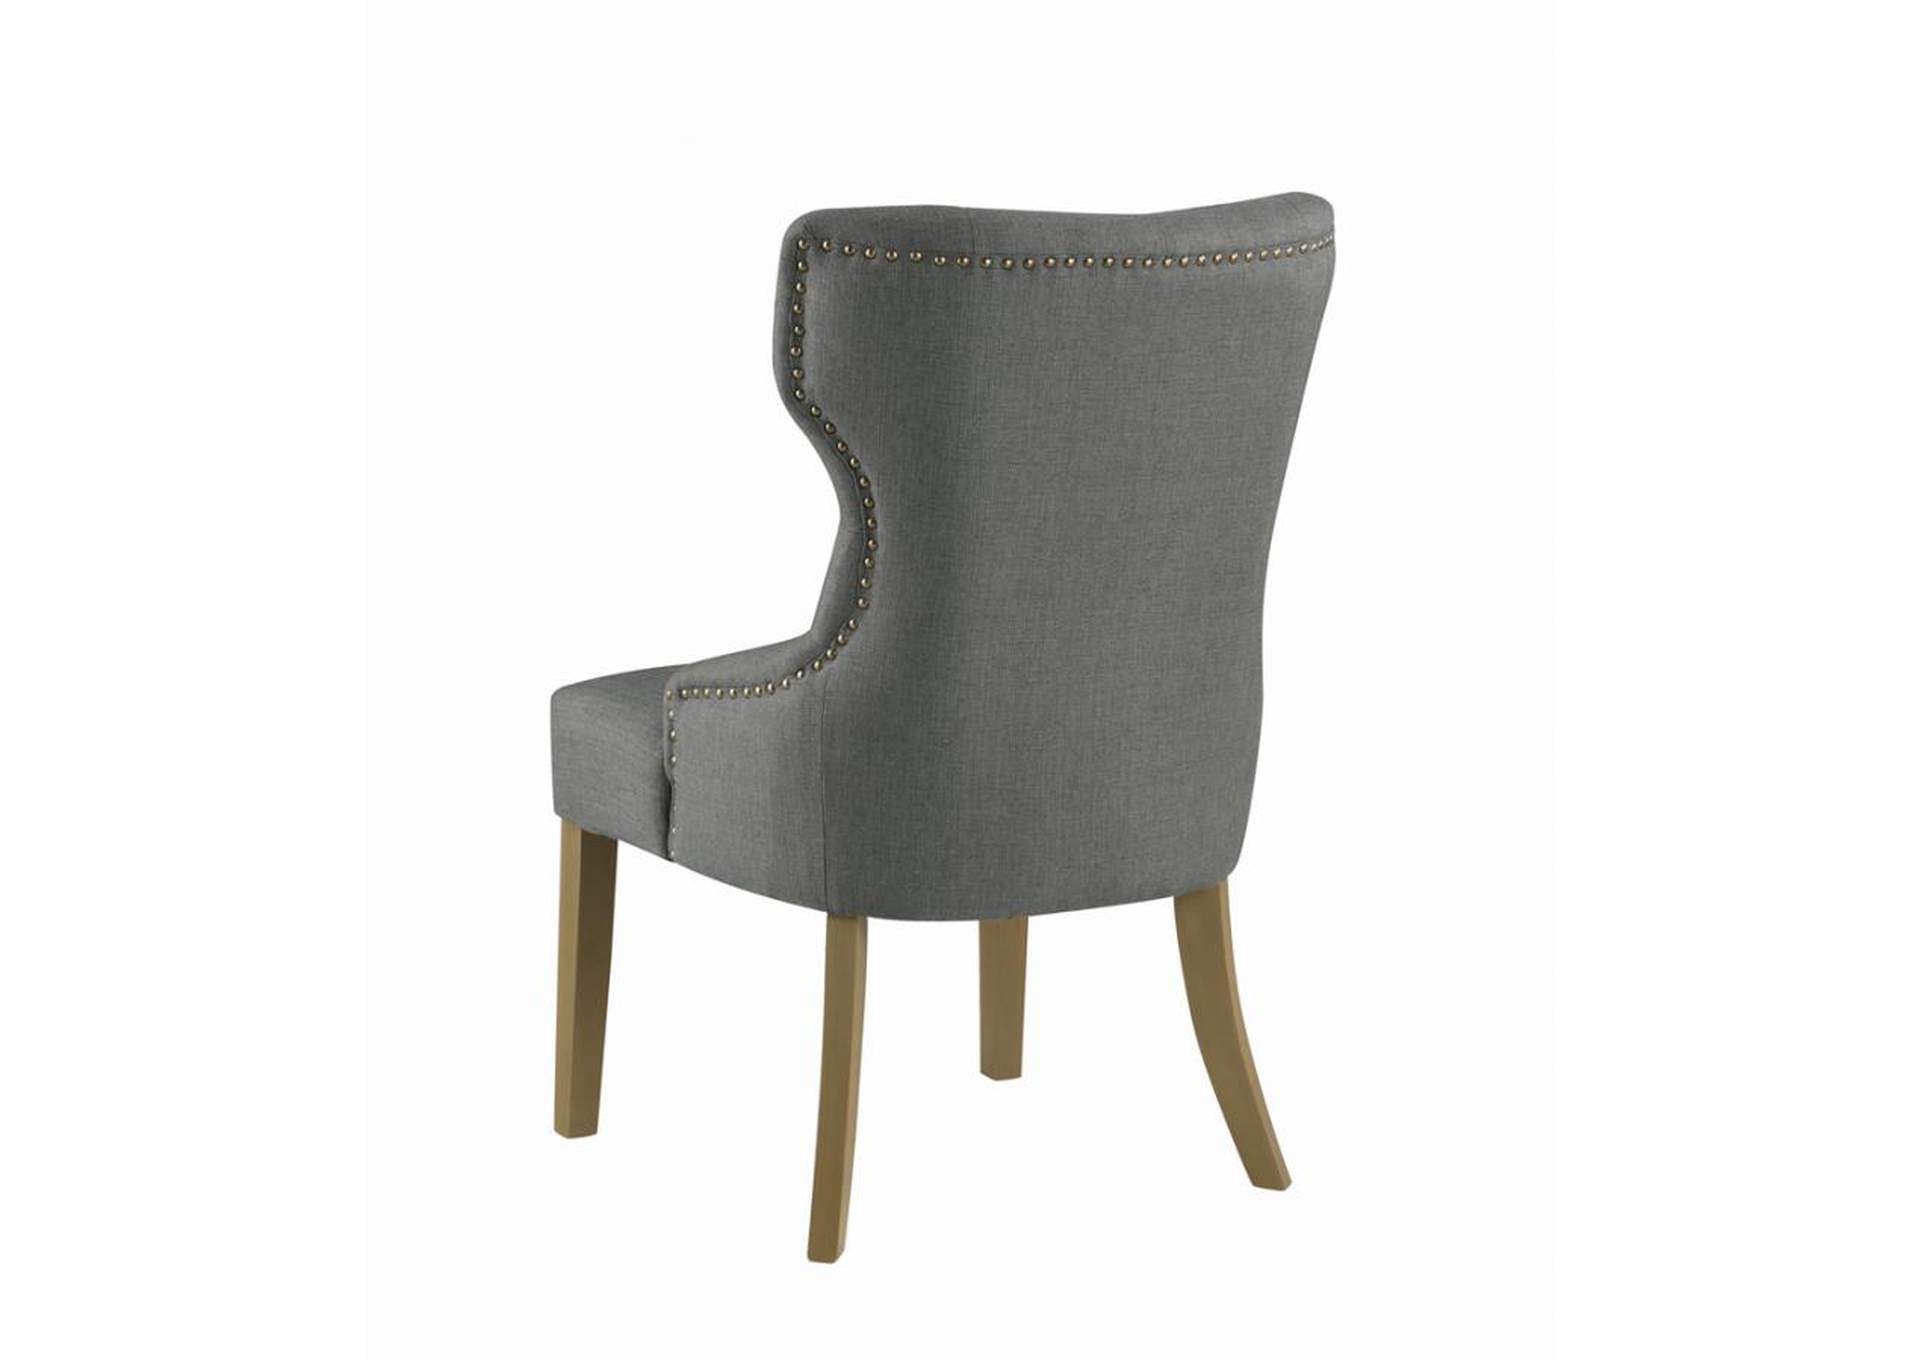 Baney Tufted Upholstered Dining Chair Grey,Coaster Furniture